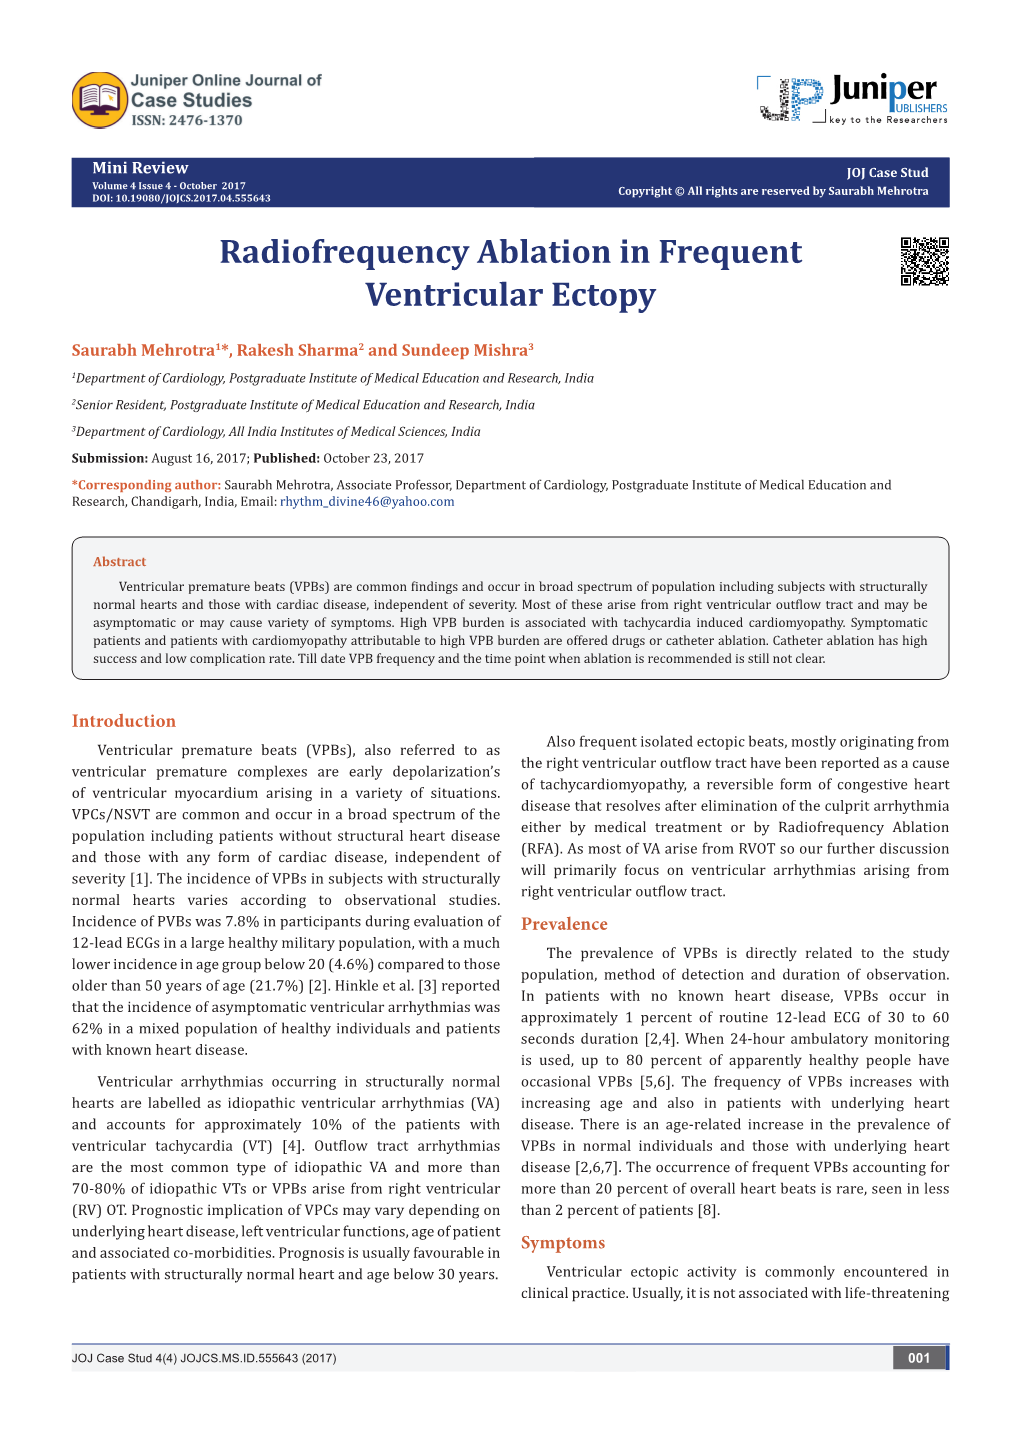 Radiofrequency Ablation in Frequent Ventricular Ectopy